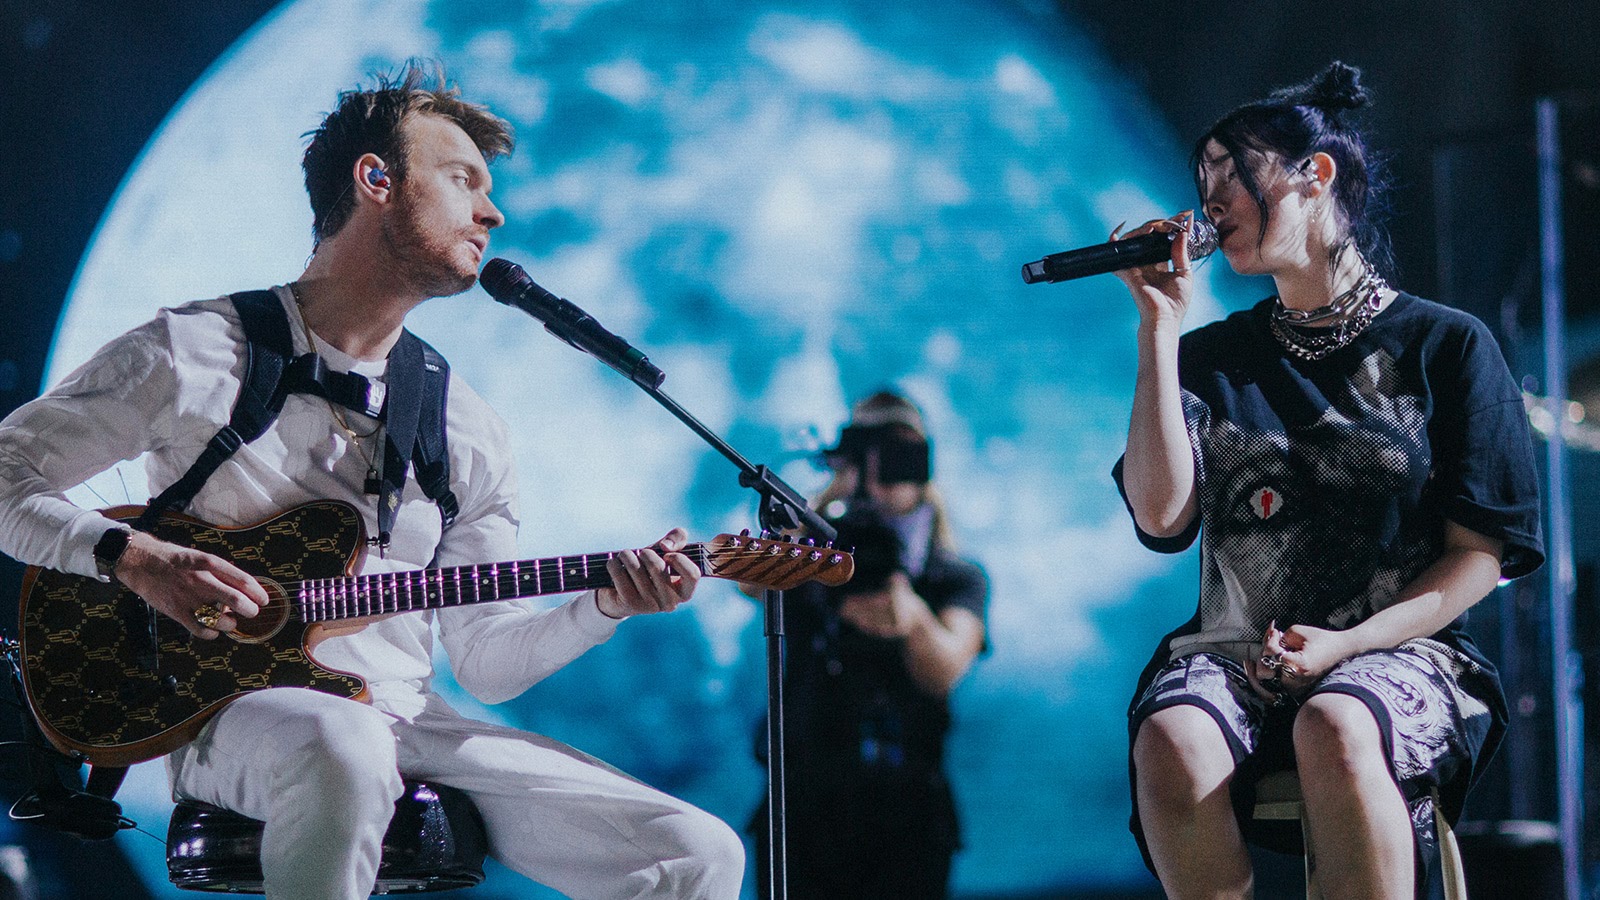 Billie and Finneas on stage